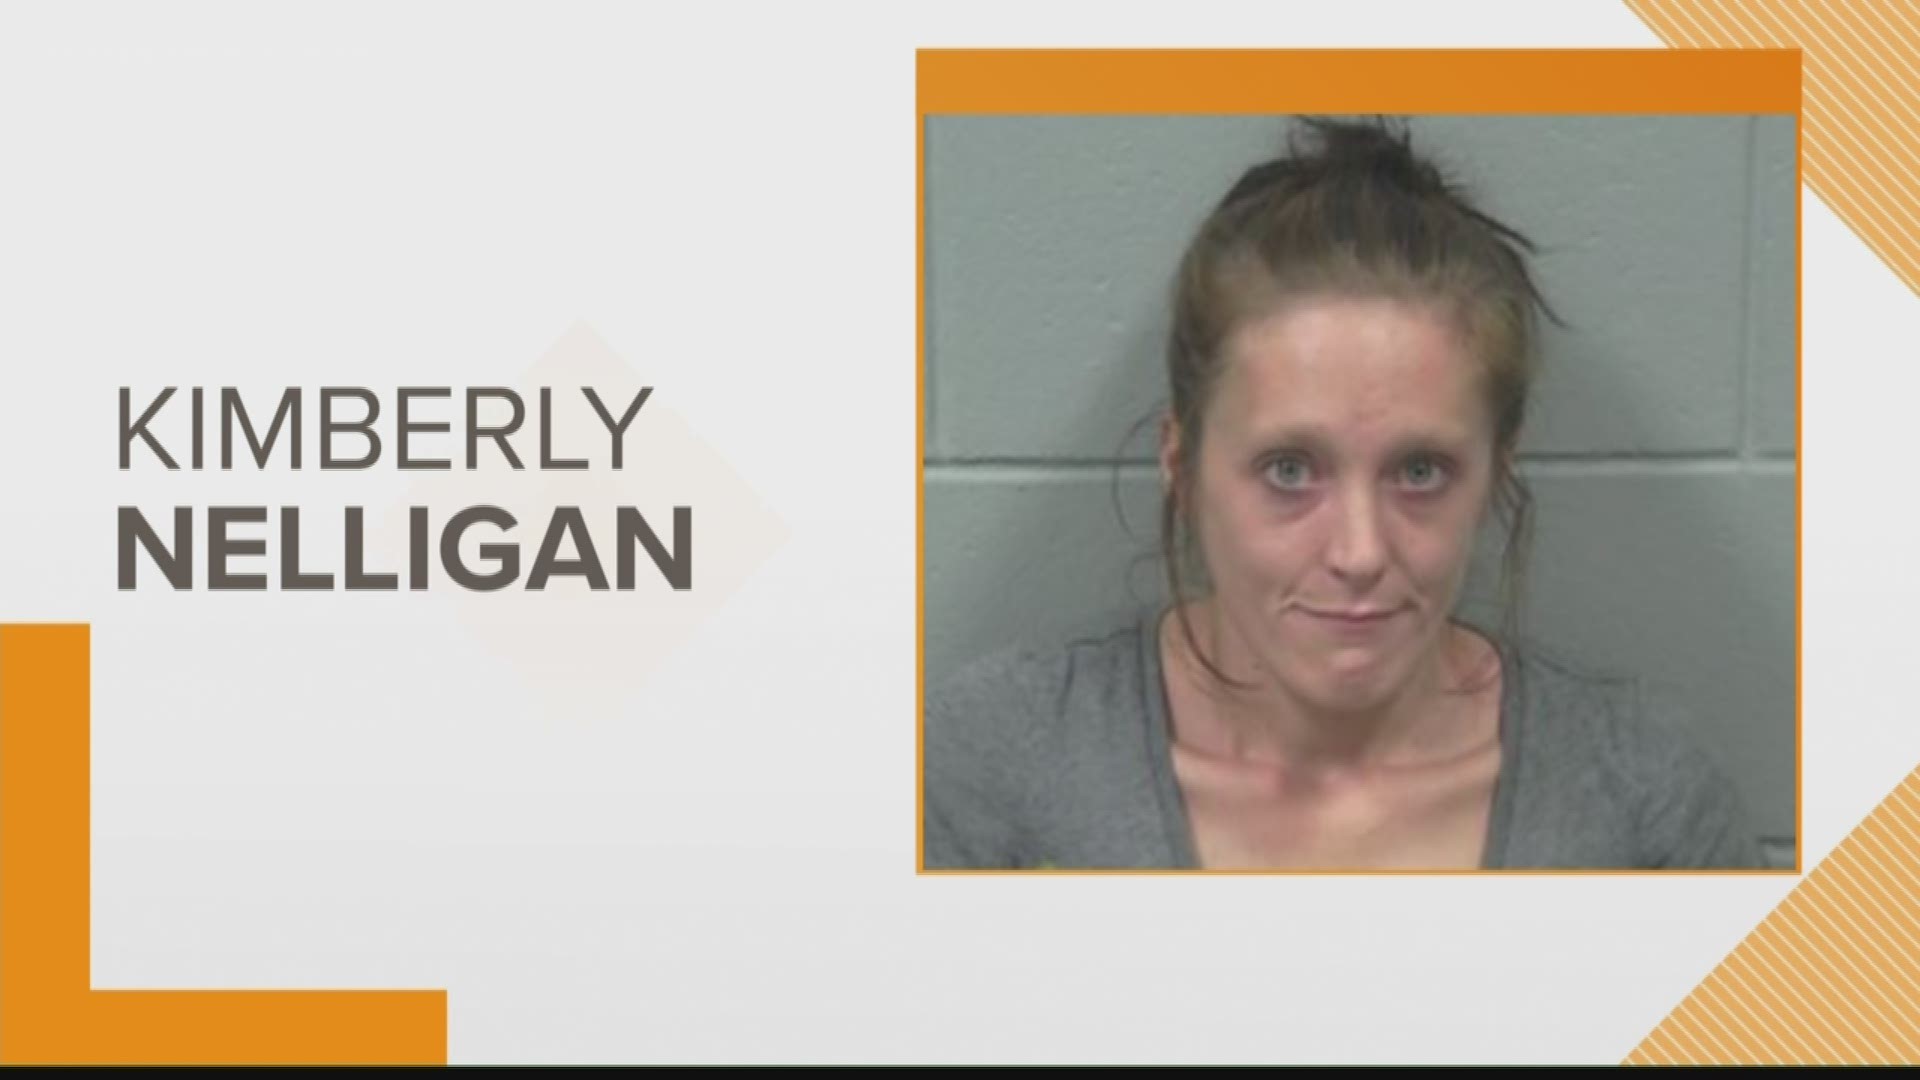 A 1-year-old girl died on October 19, 2018, and her mother is now being charged. Kimberly Nelligan, 33, was arrested Tuesday, Sept 18, for endangering the welfare of a child.